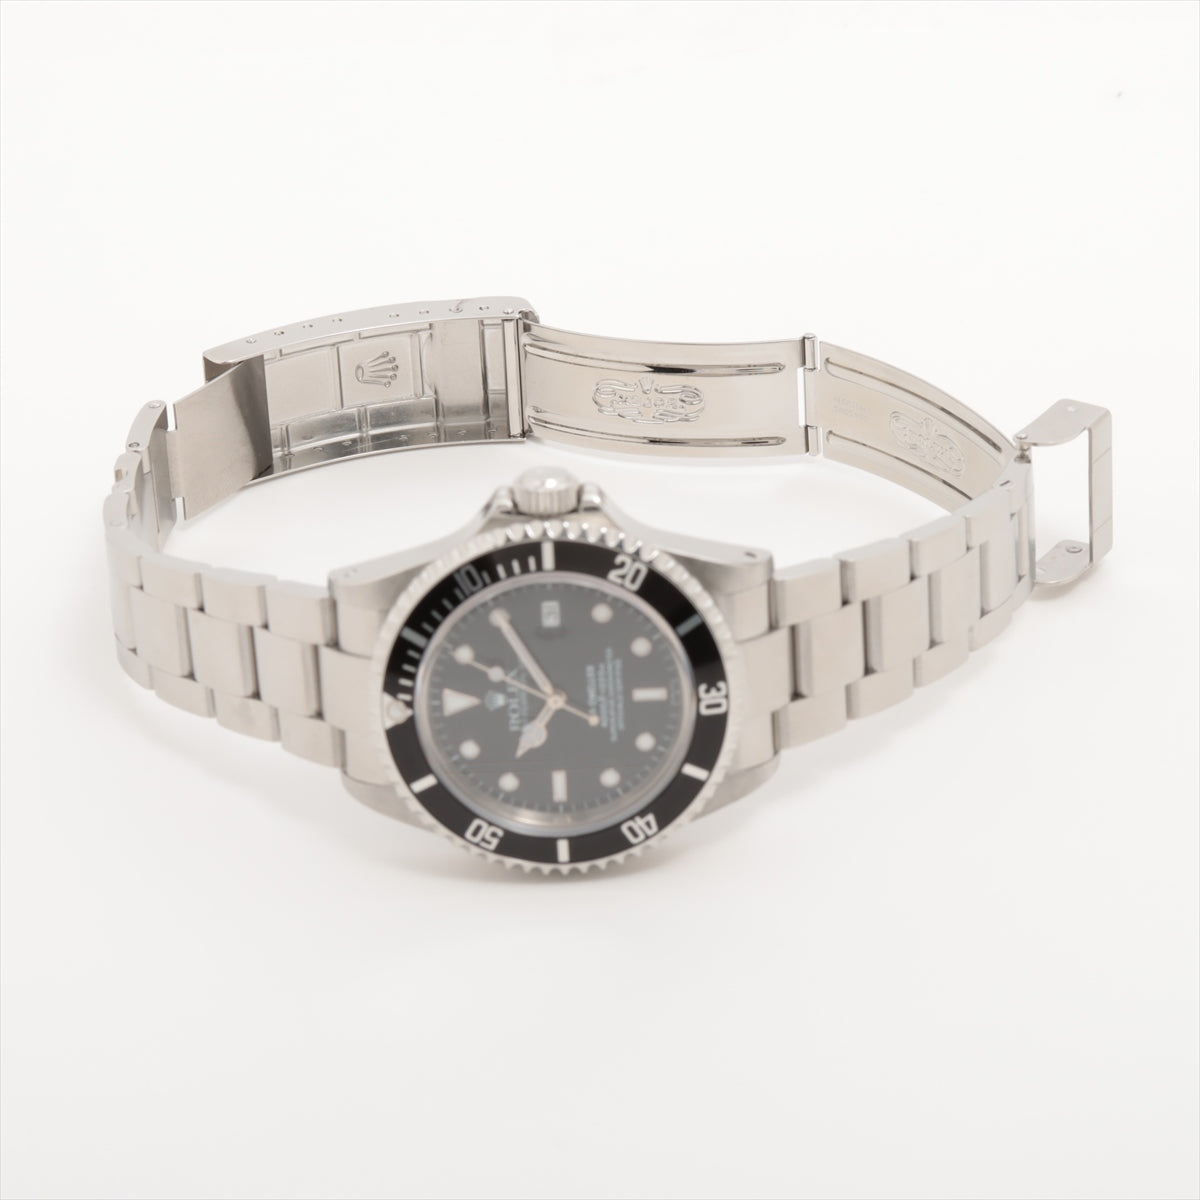 Rolex Sea-Dweller 16600 SS AT Black Dial 2 Extra Links